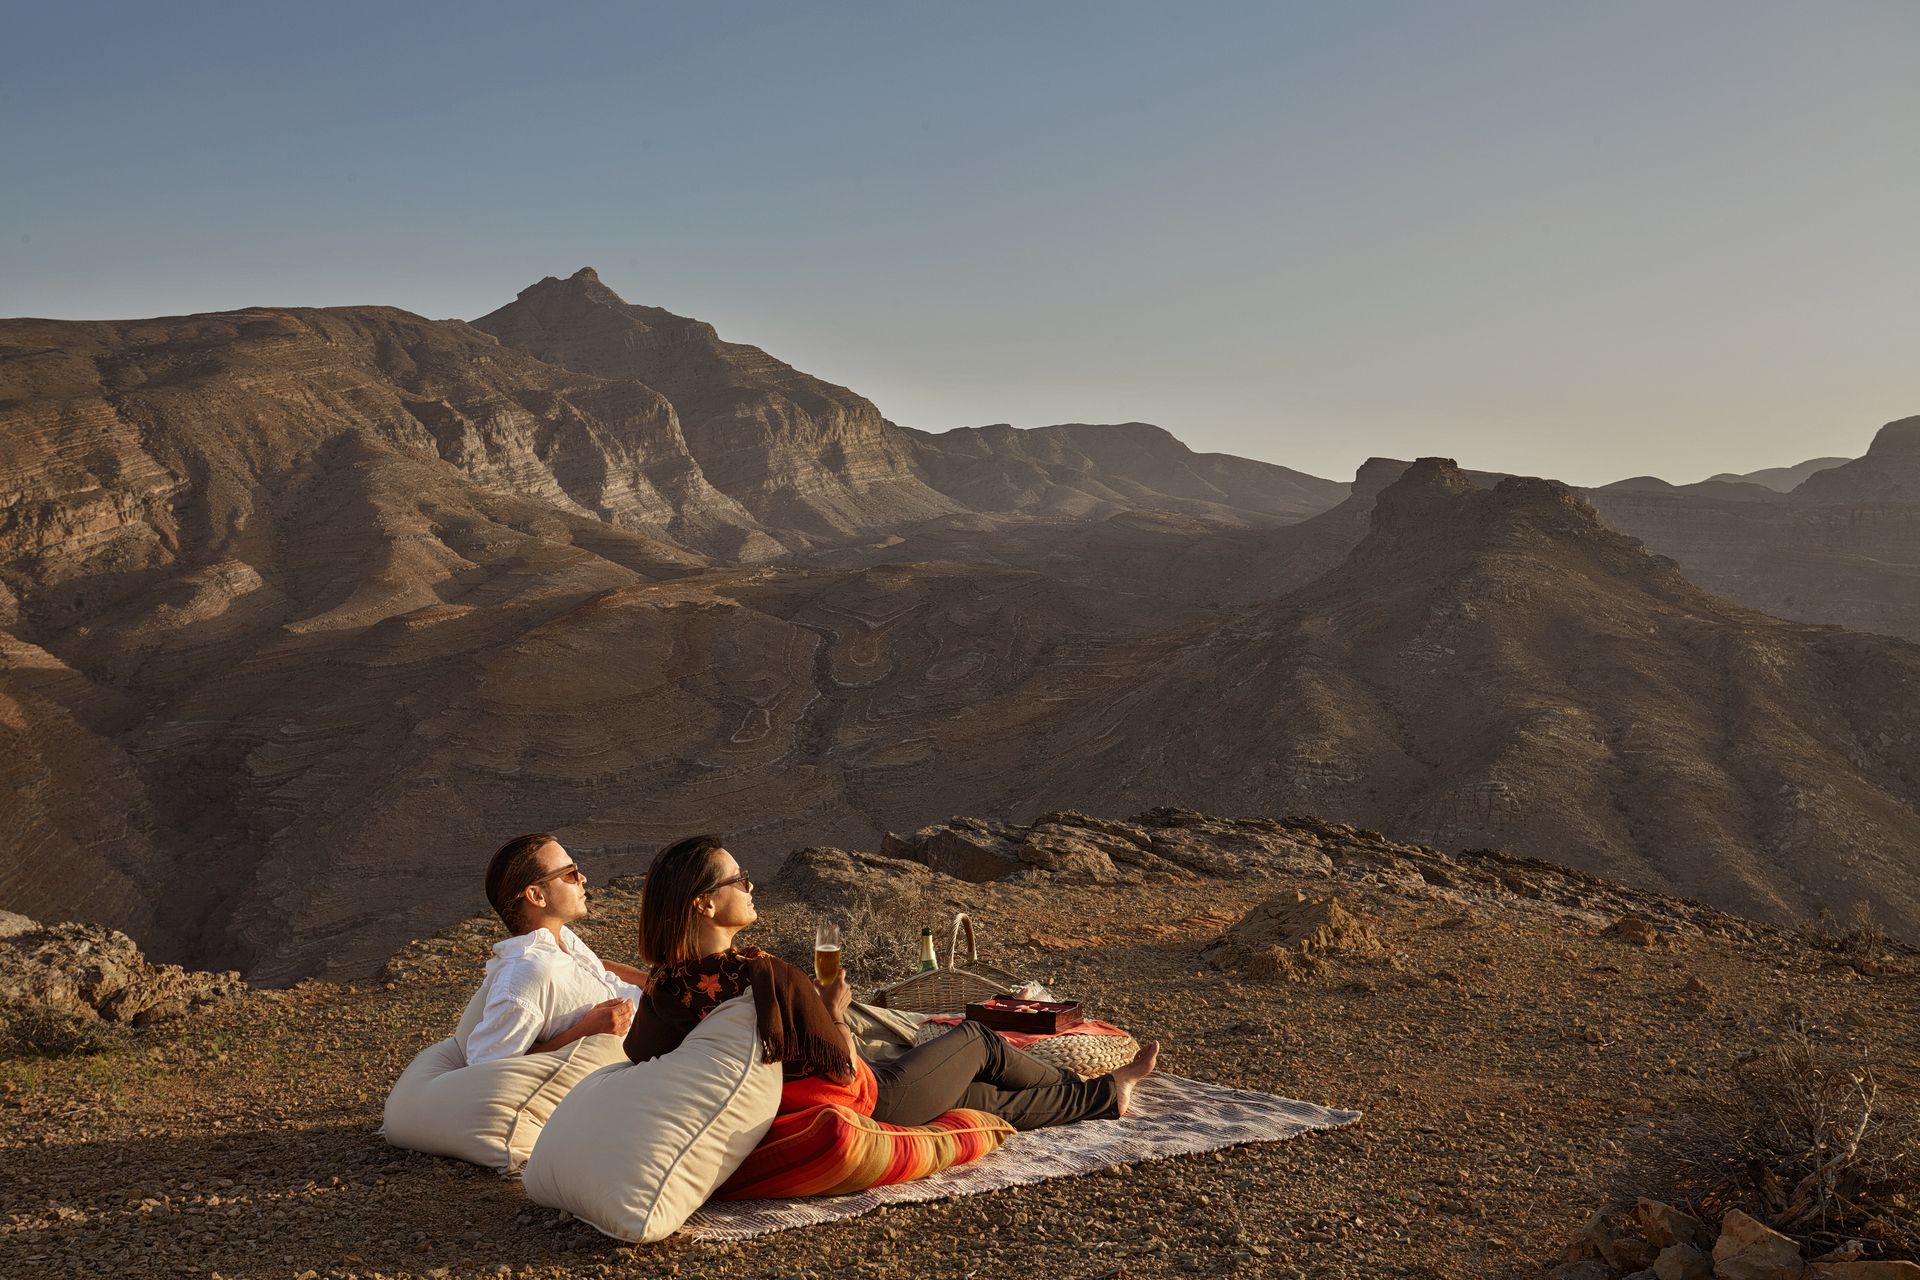 Two people are sitting on a blanket on top of a mountain.